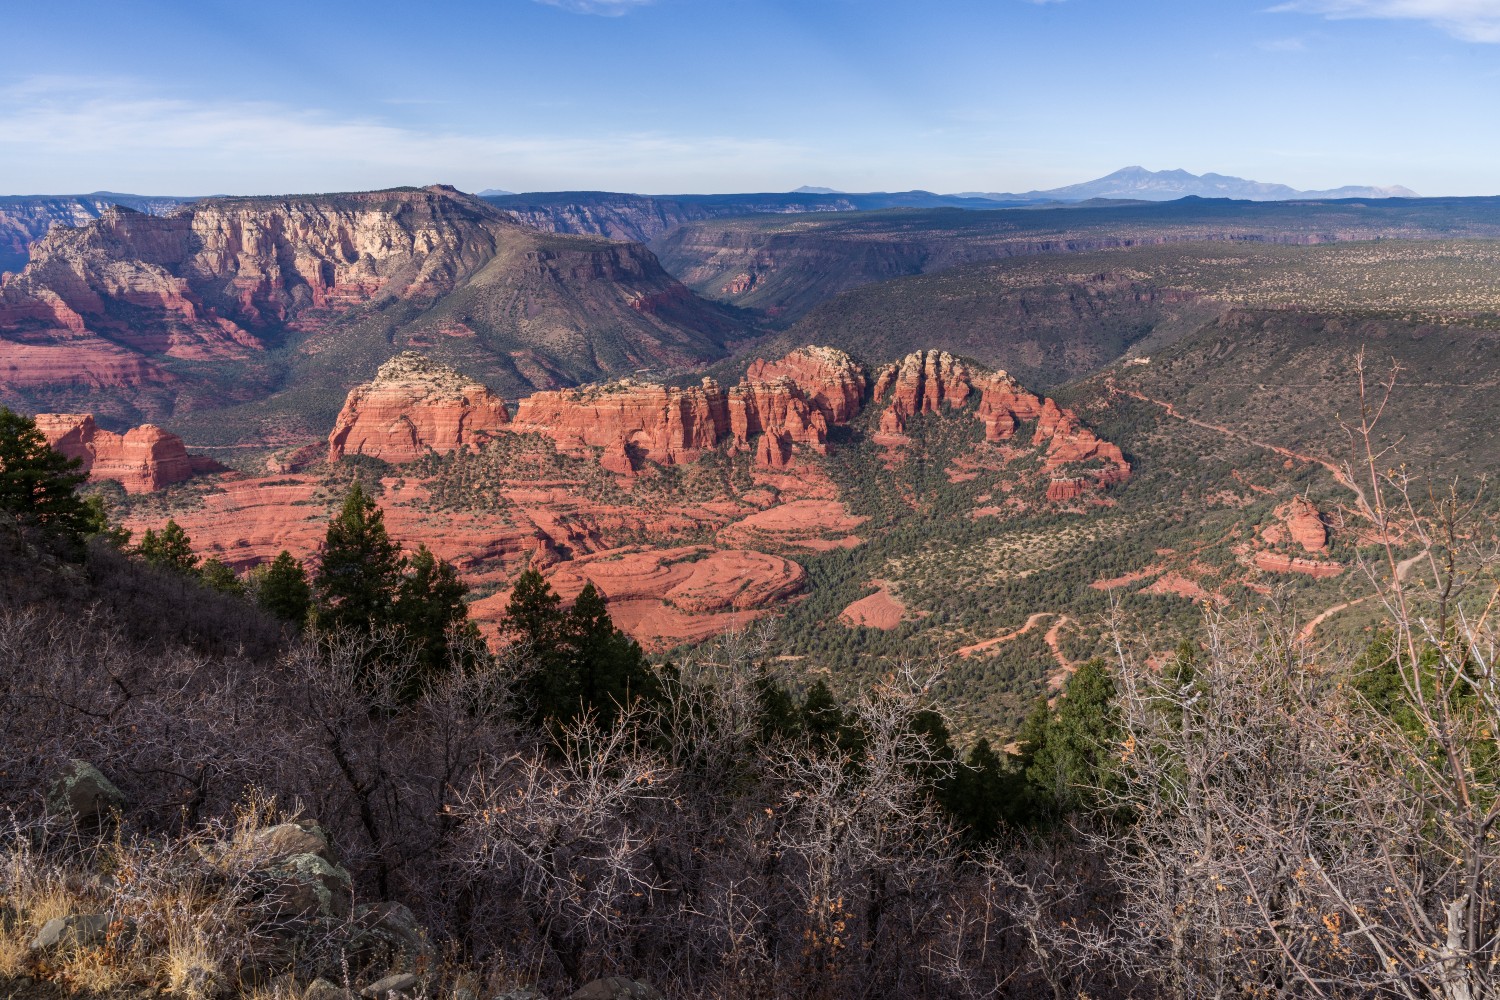 The Munds Mountain Trail is a challenging, remote trail in the Munds Mountain Wilderness in Sedona, Arizona.